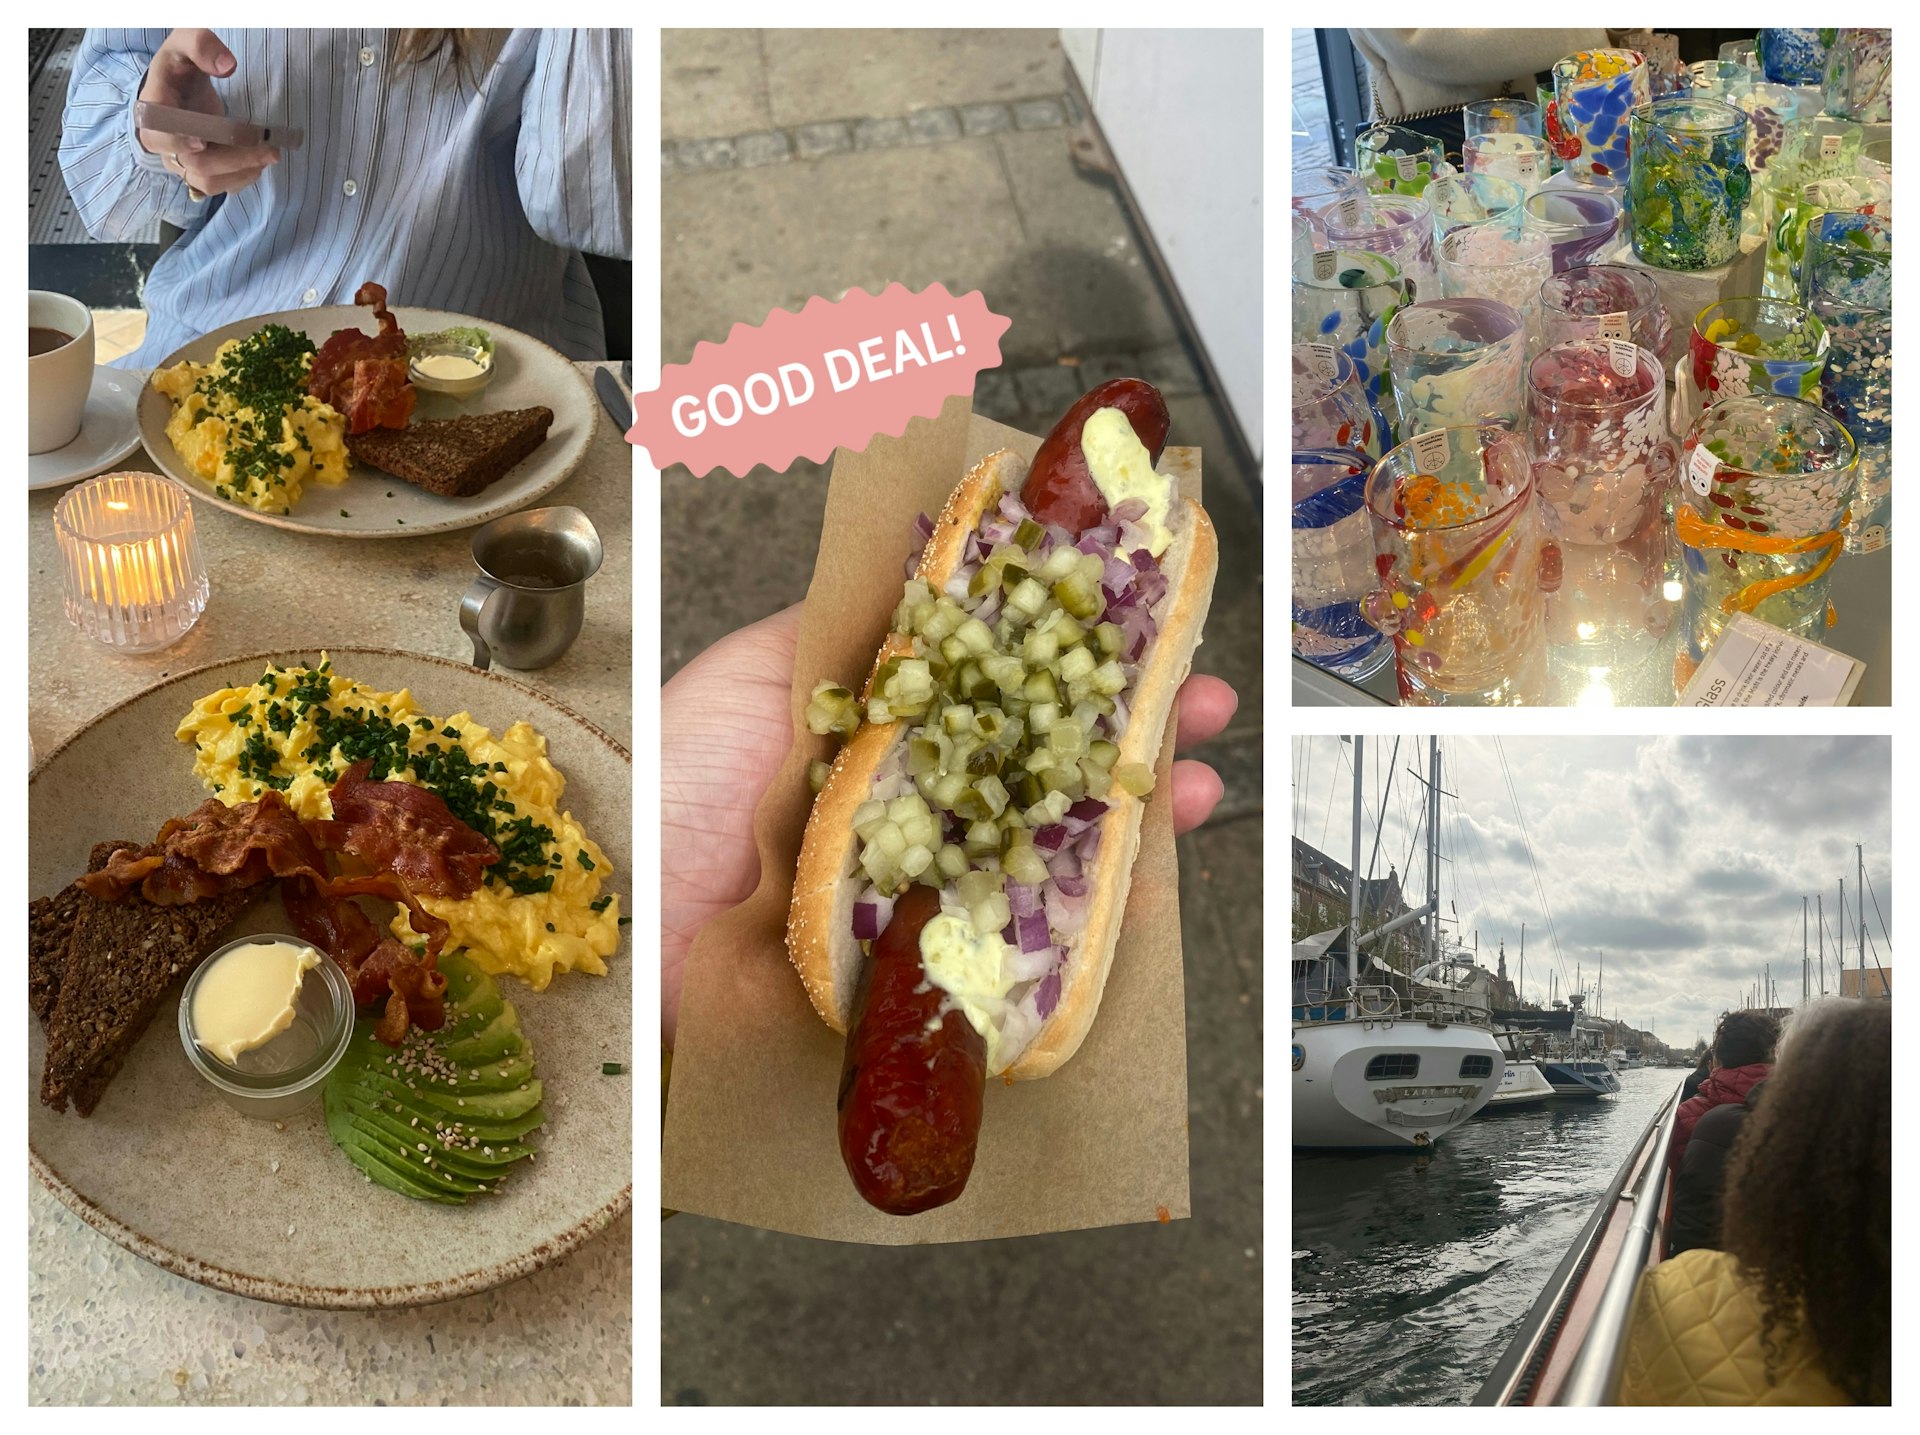 L-R: Avocado, bacon and toast; up-close shot of a hotdog; a collection of colorful glassware; a boat tour of Copenhagen